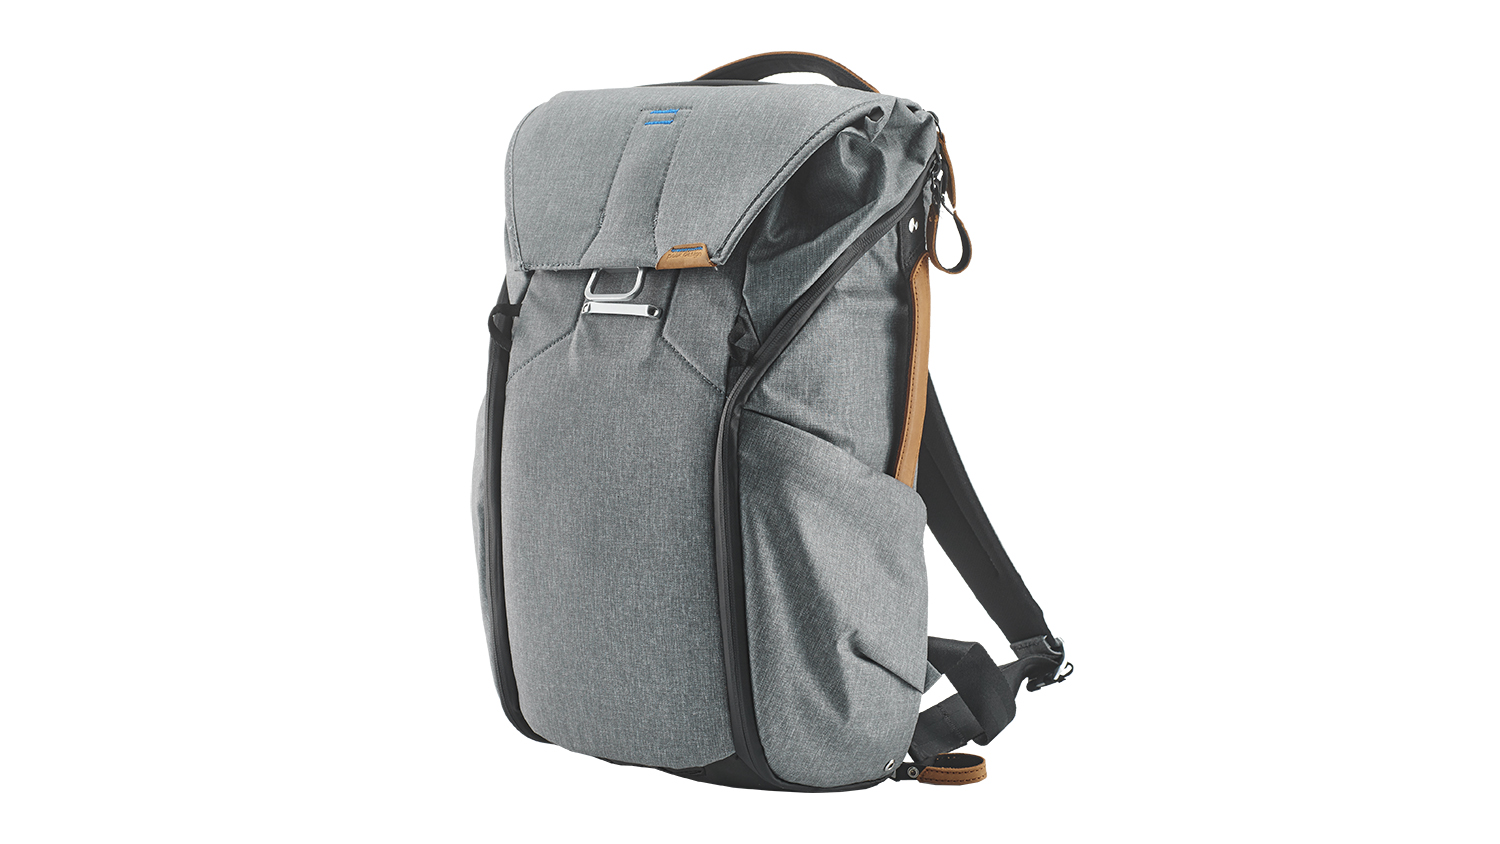 Best camera bags and cases: Peak Design Everyday Backpack 20L